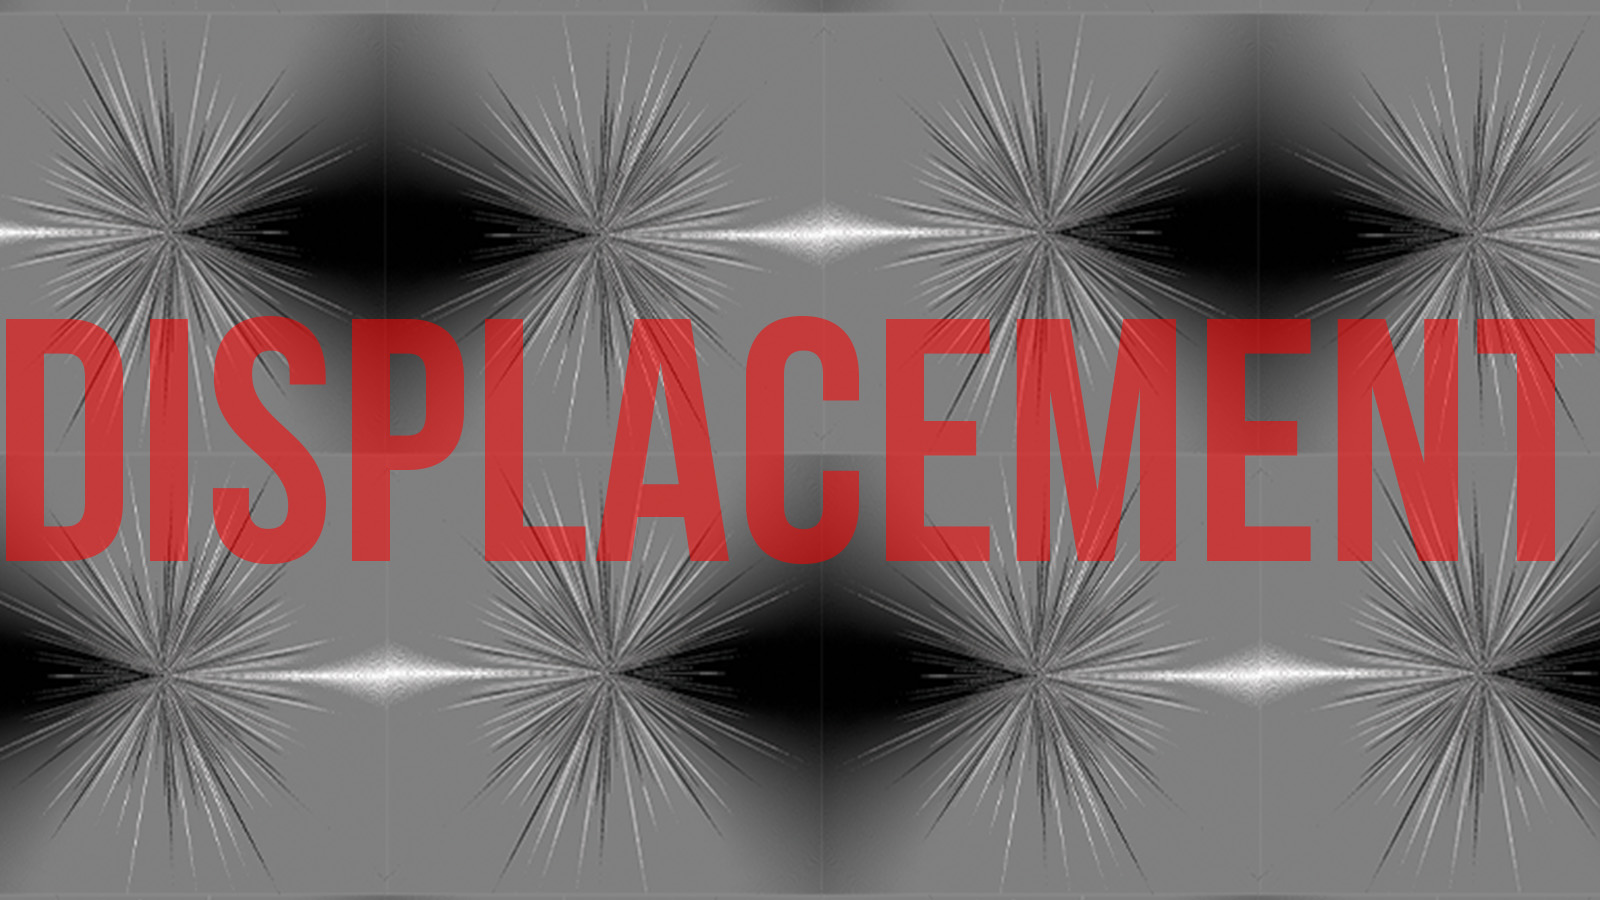 Red text "Displacement" on abstract black and gray background